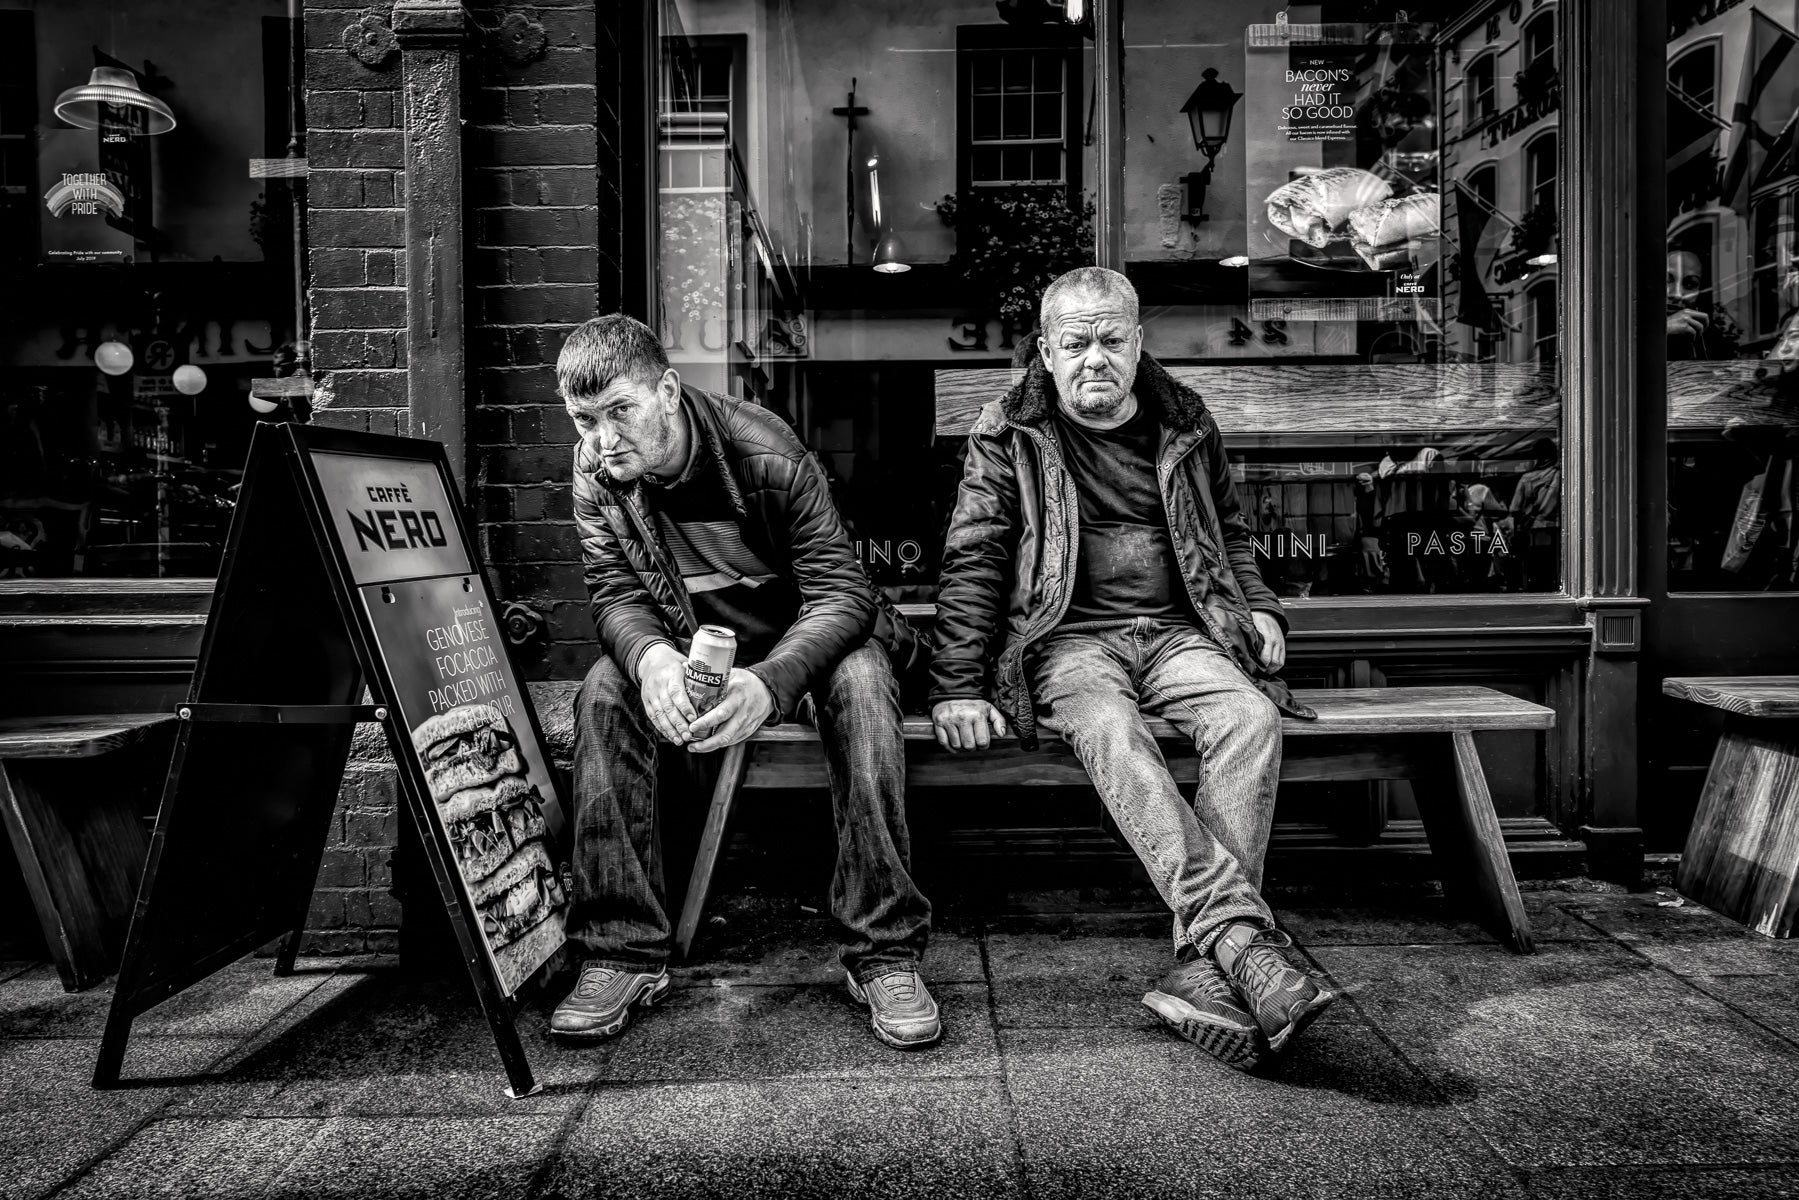 These gents in Dublin, Ireland, were sitting in front of a cafe; I quickly snapped their photograph to obtain their authentic expression.